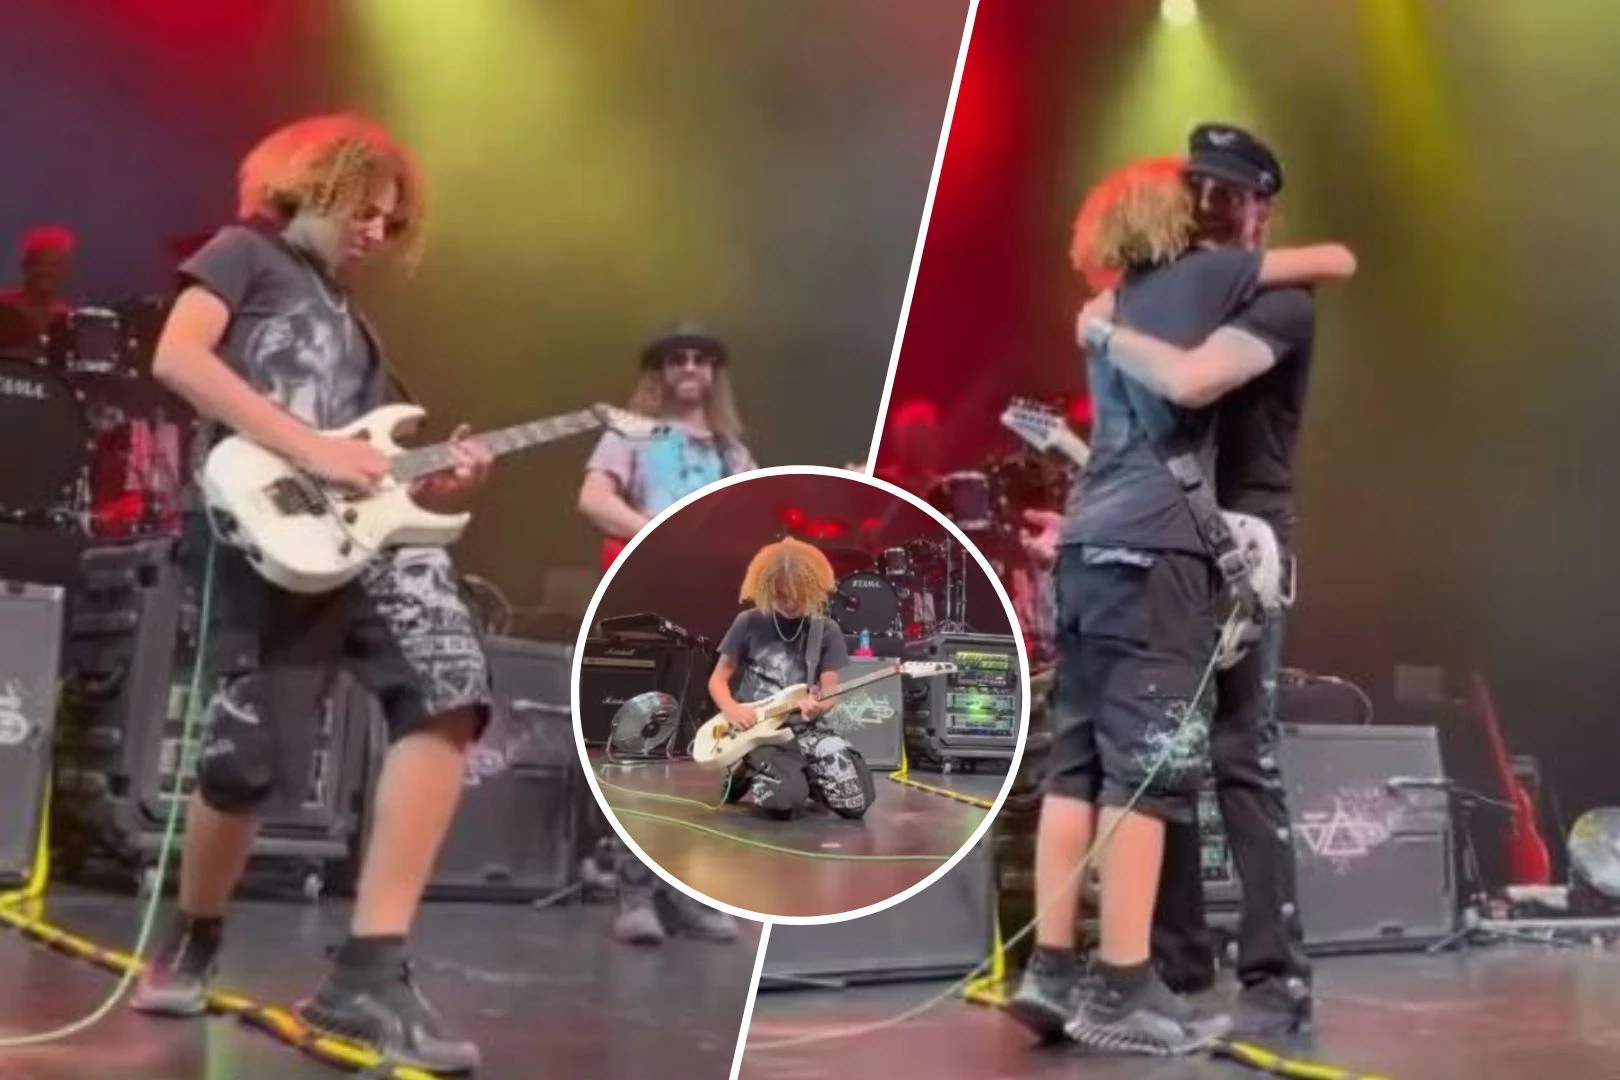 Steve Vai Hands Guitar to Fan in Crowd, Kid Plays Solo on Stage